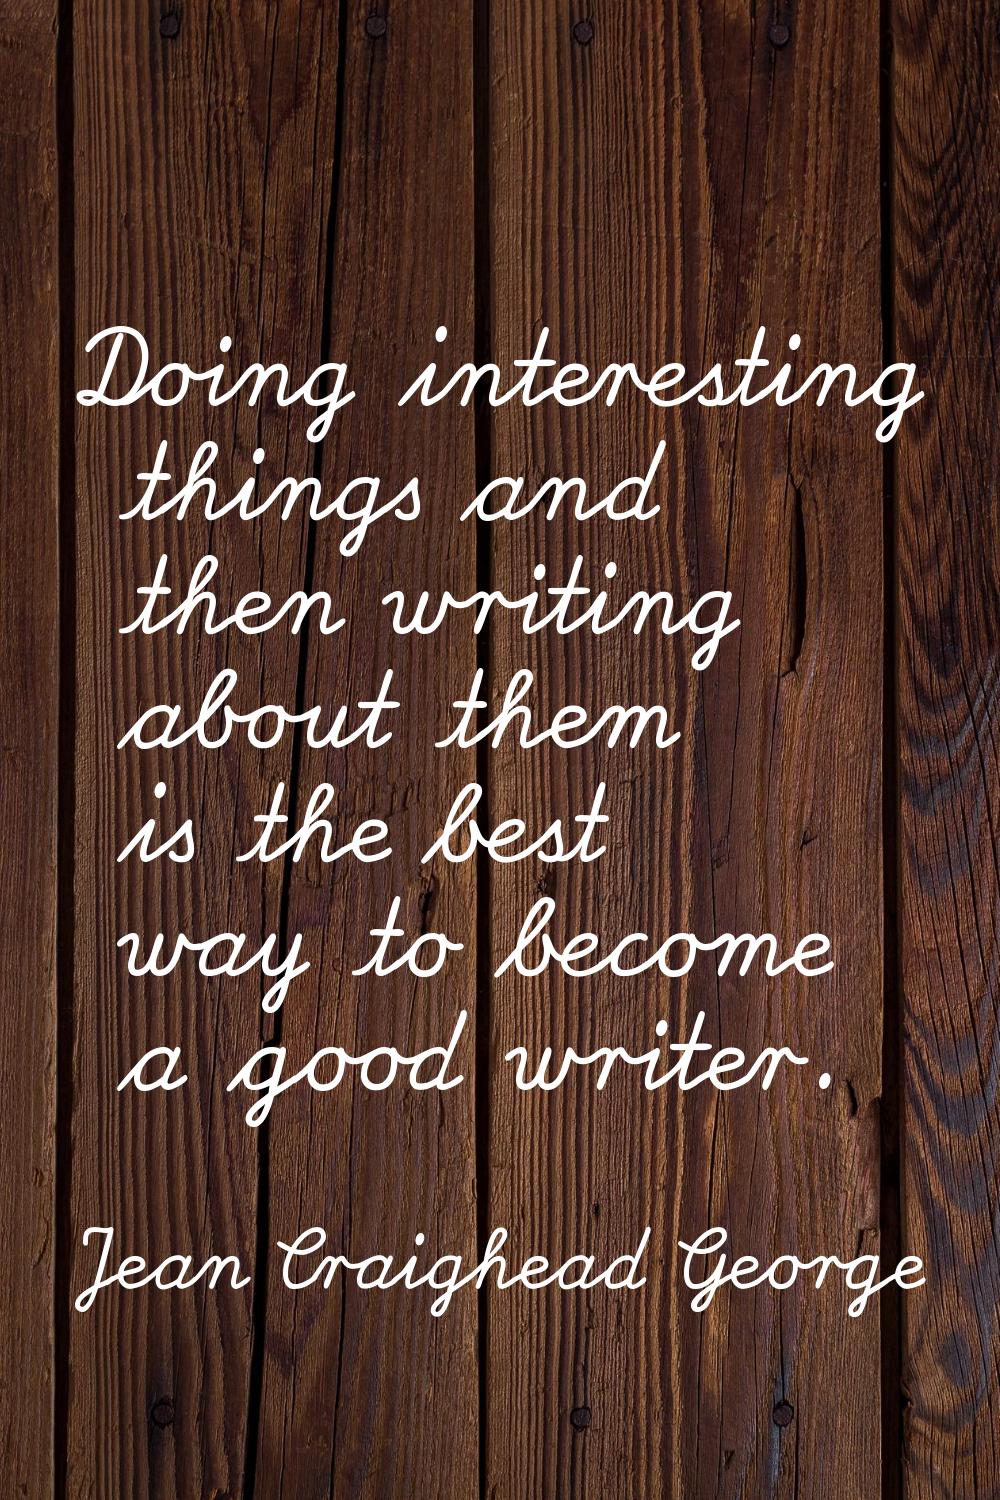 Doing interesting things and then writing about them is the best way to become a good writer.